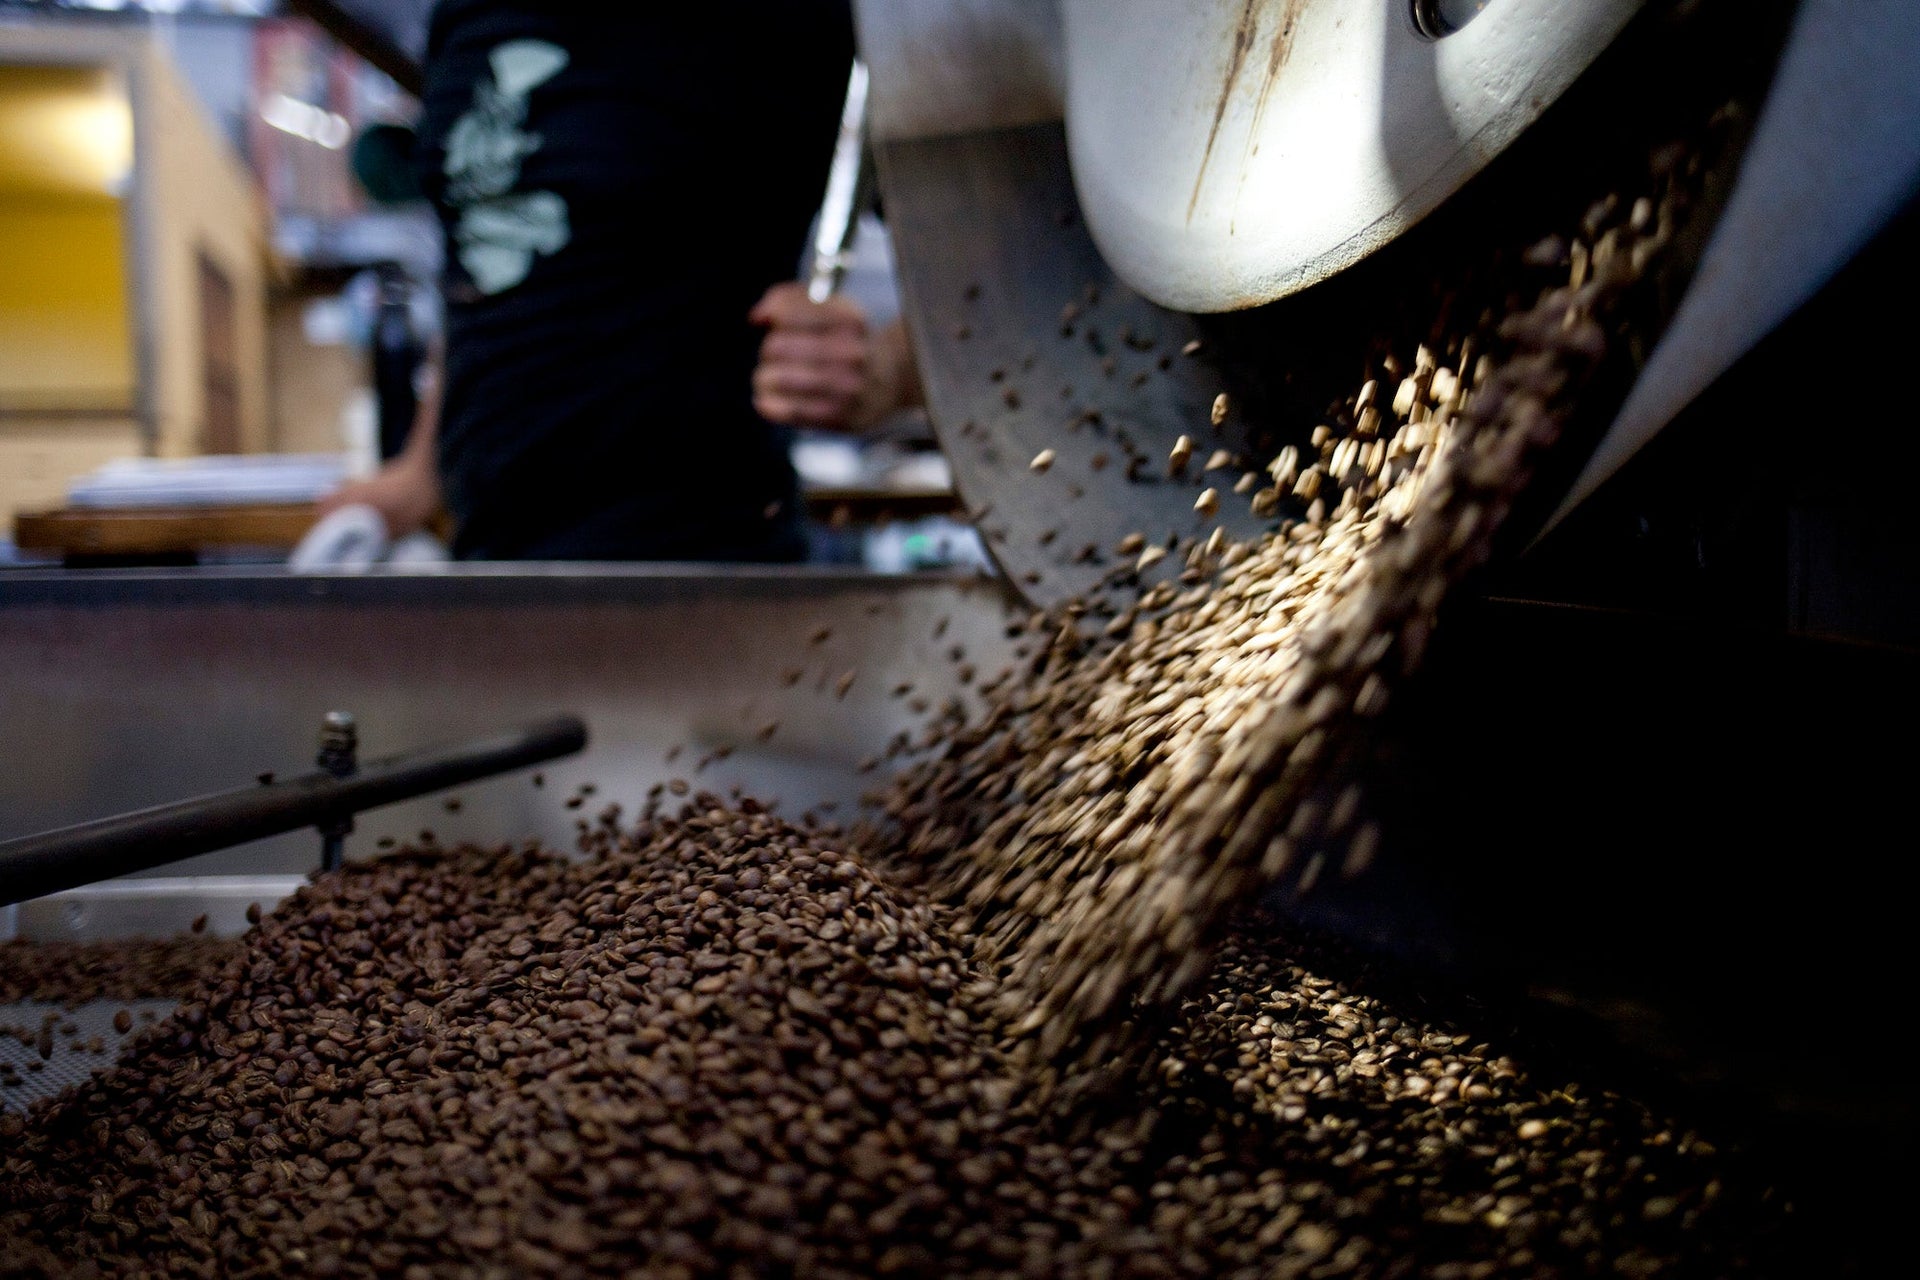 Air Quality, Worker Safety and Coffee Roasting